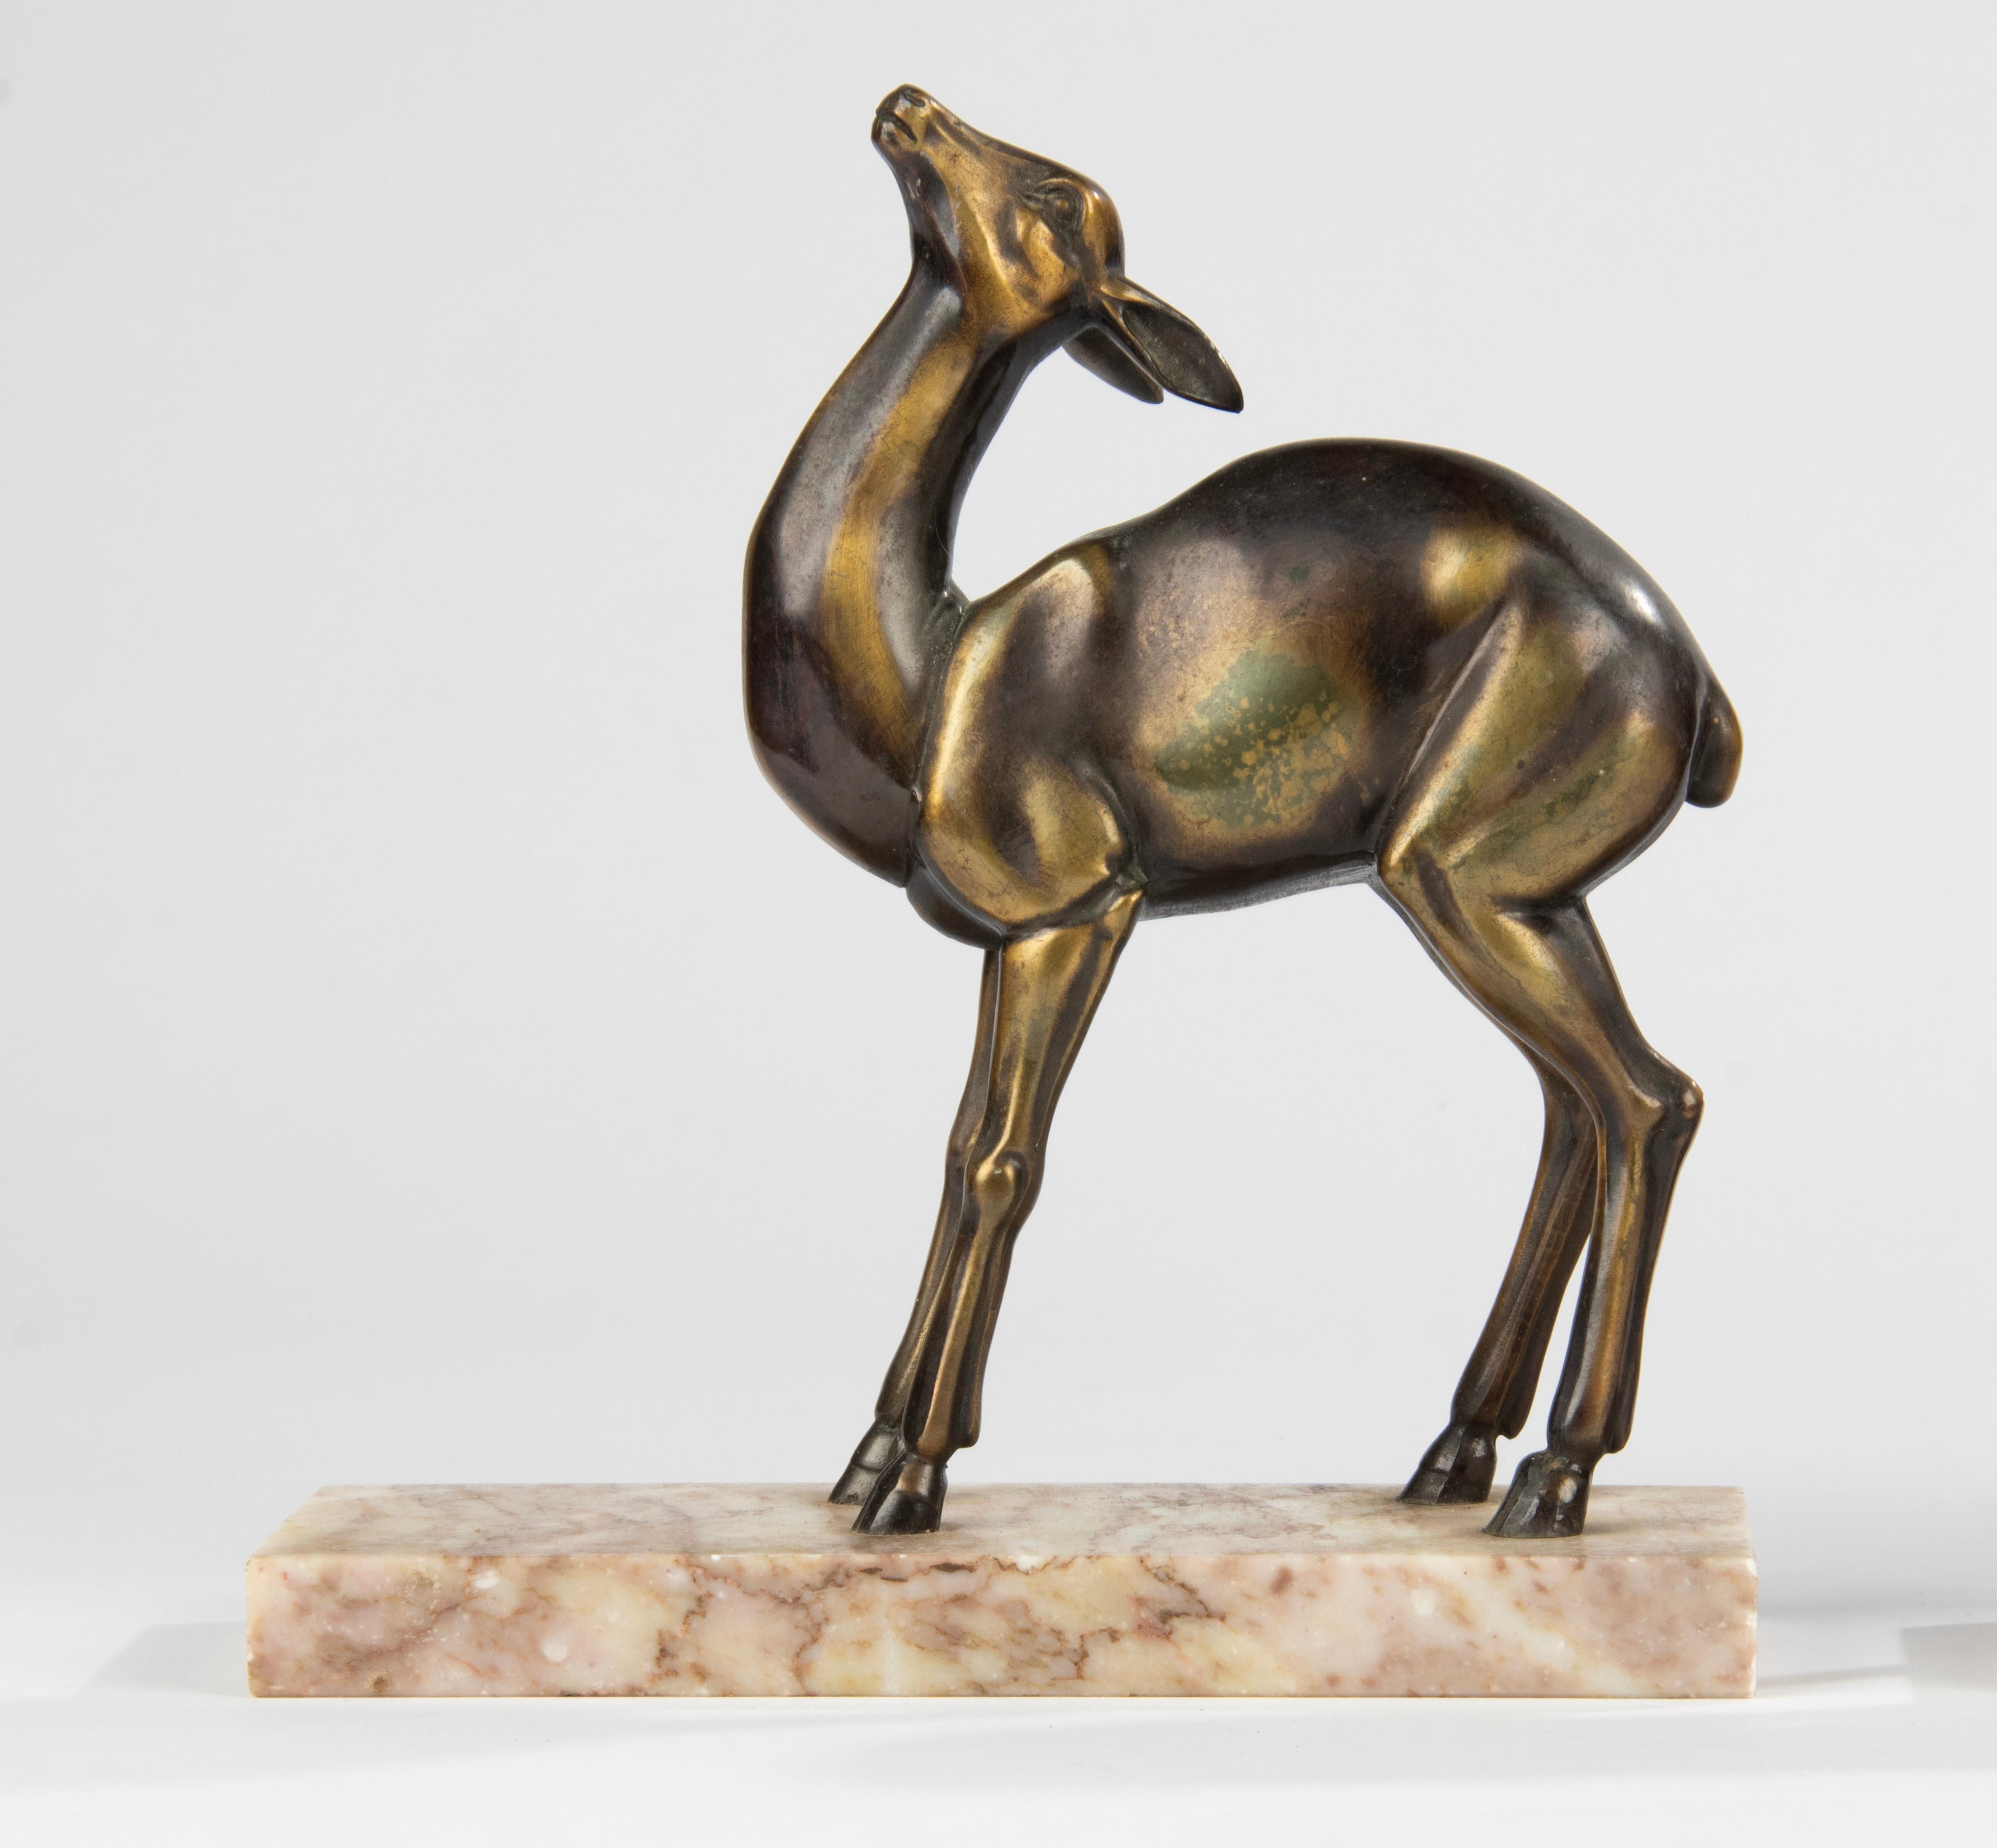 Pair of Art Deco period book ends with sculptures of deer. Made of casted spelter, patinated in multi color, brown and bronze-like color, on marble bases. In good condition with minor signs of age. Made in France around 1920-1930.
Dimensions: 21